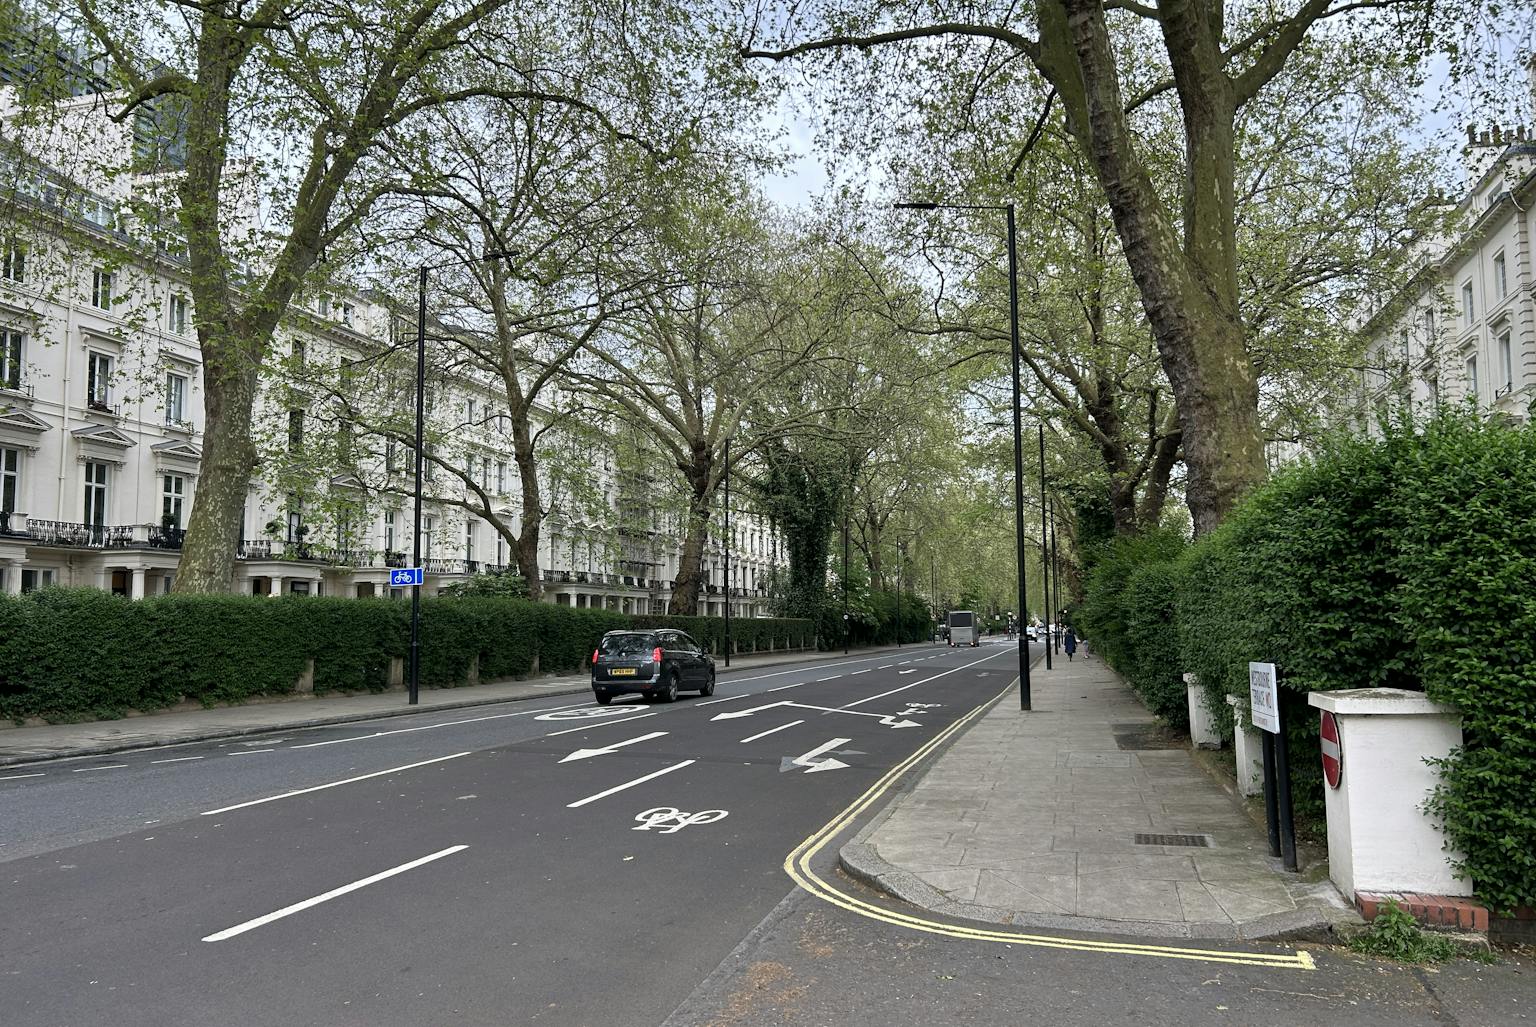 A street in London - lined with trees and white buildings